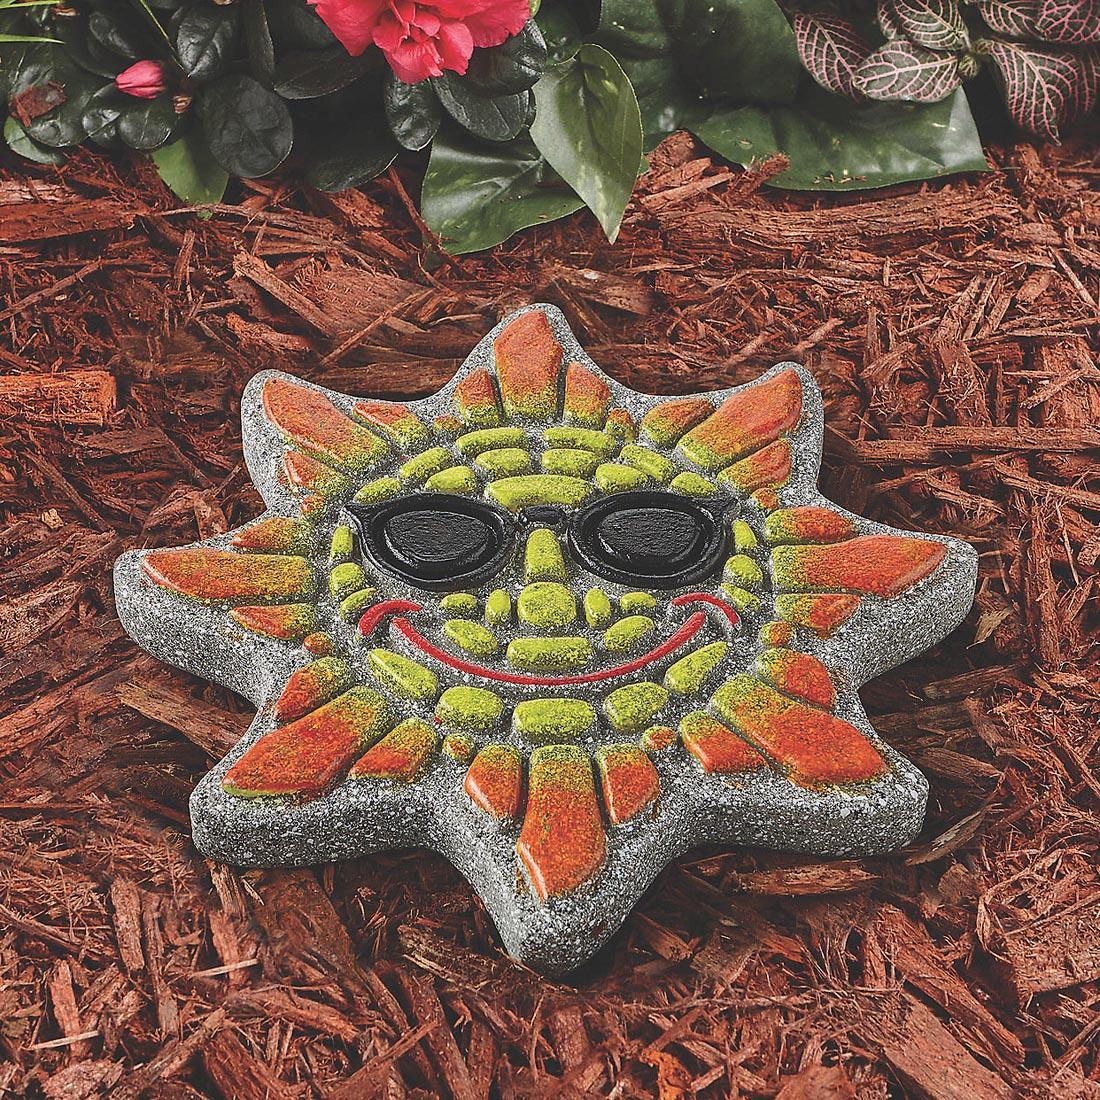 A completed project from the Paint Your Own Stepping Stone Sun Kit